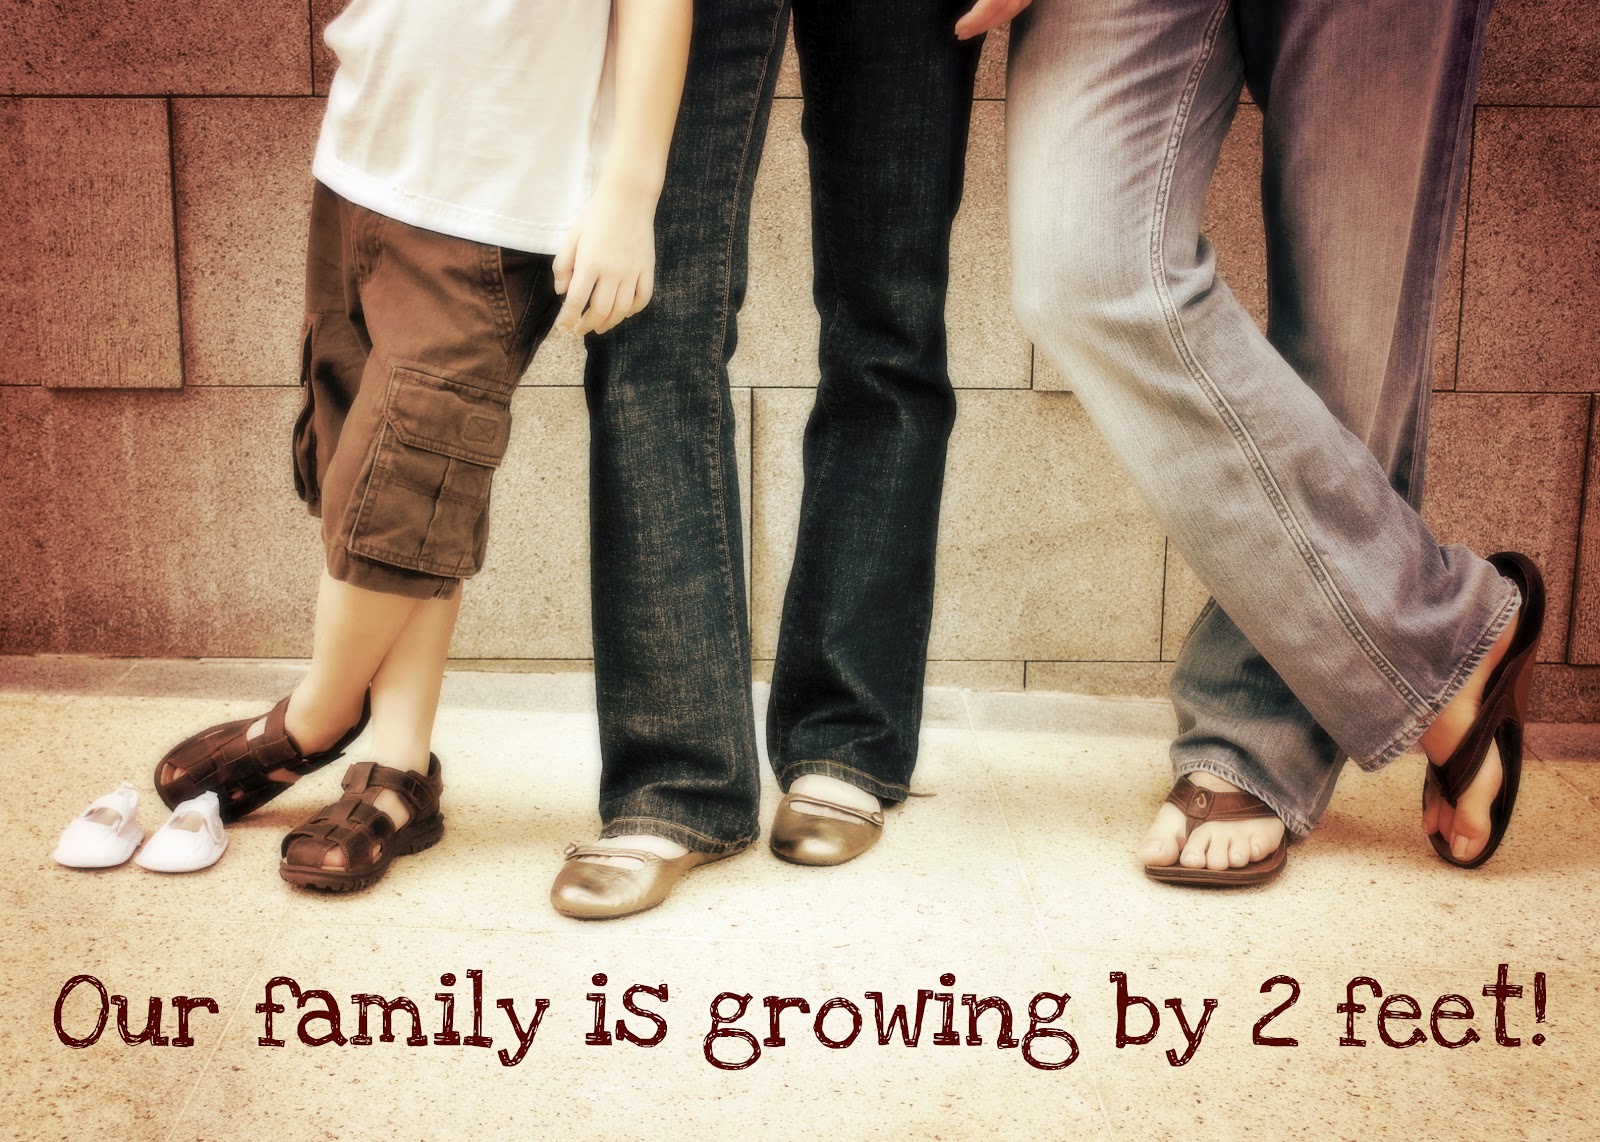 Denton News: Our family is growing by 2 feet!